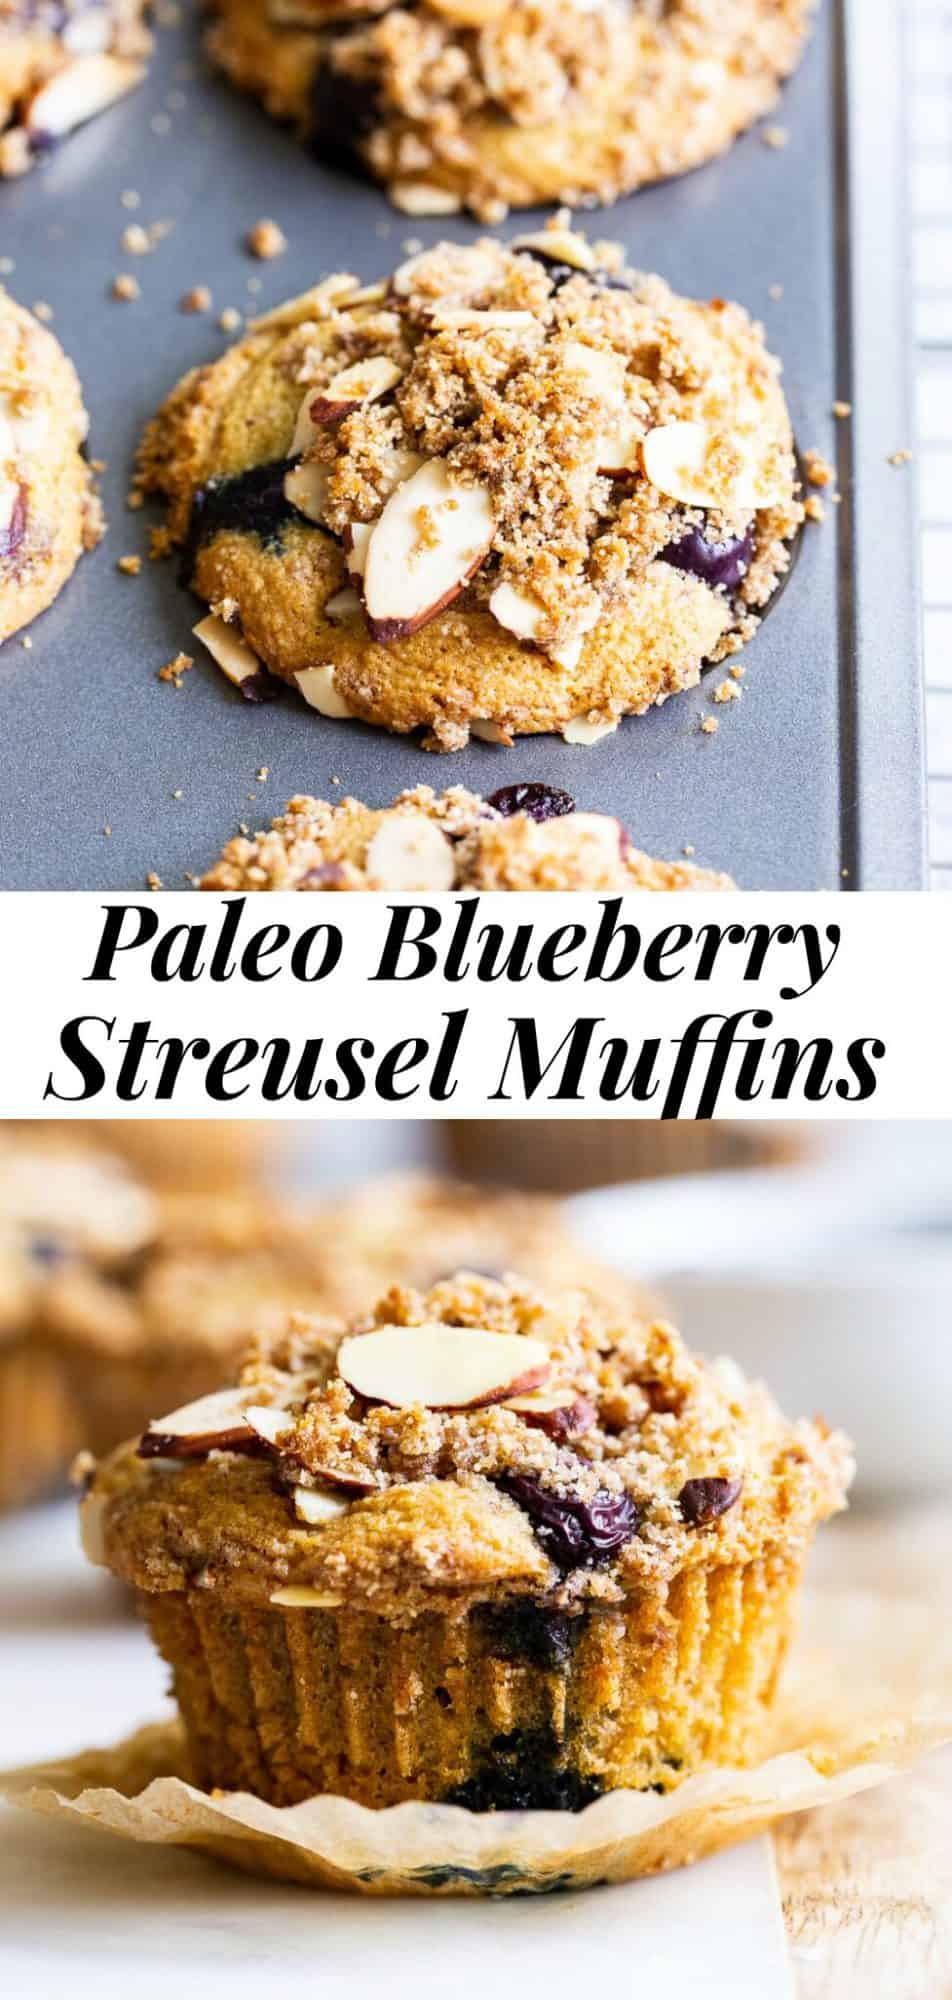 Paleo Blueberry Muffins with Almond Streusel {Gluten-Free, Dairy-Free}